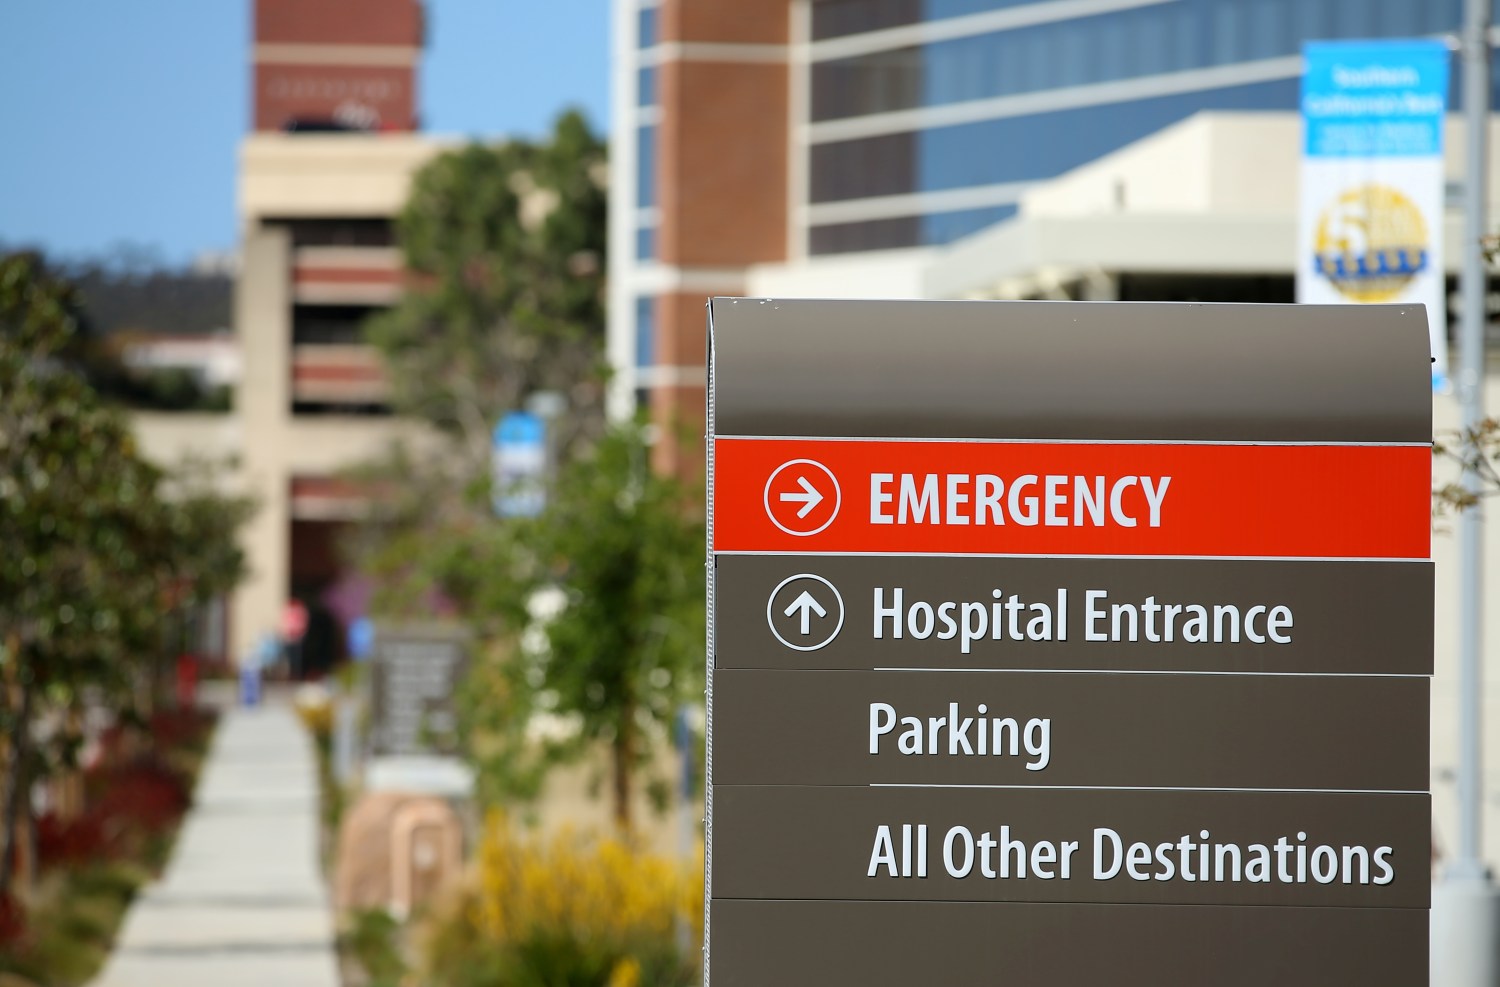 Photo: An emergency sign points to the entrance to Scripps Memorial Hospital in La Jolla, California, U.S. March 23, 2017. REUTERS/Mike Blake - RTX32G3C